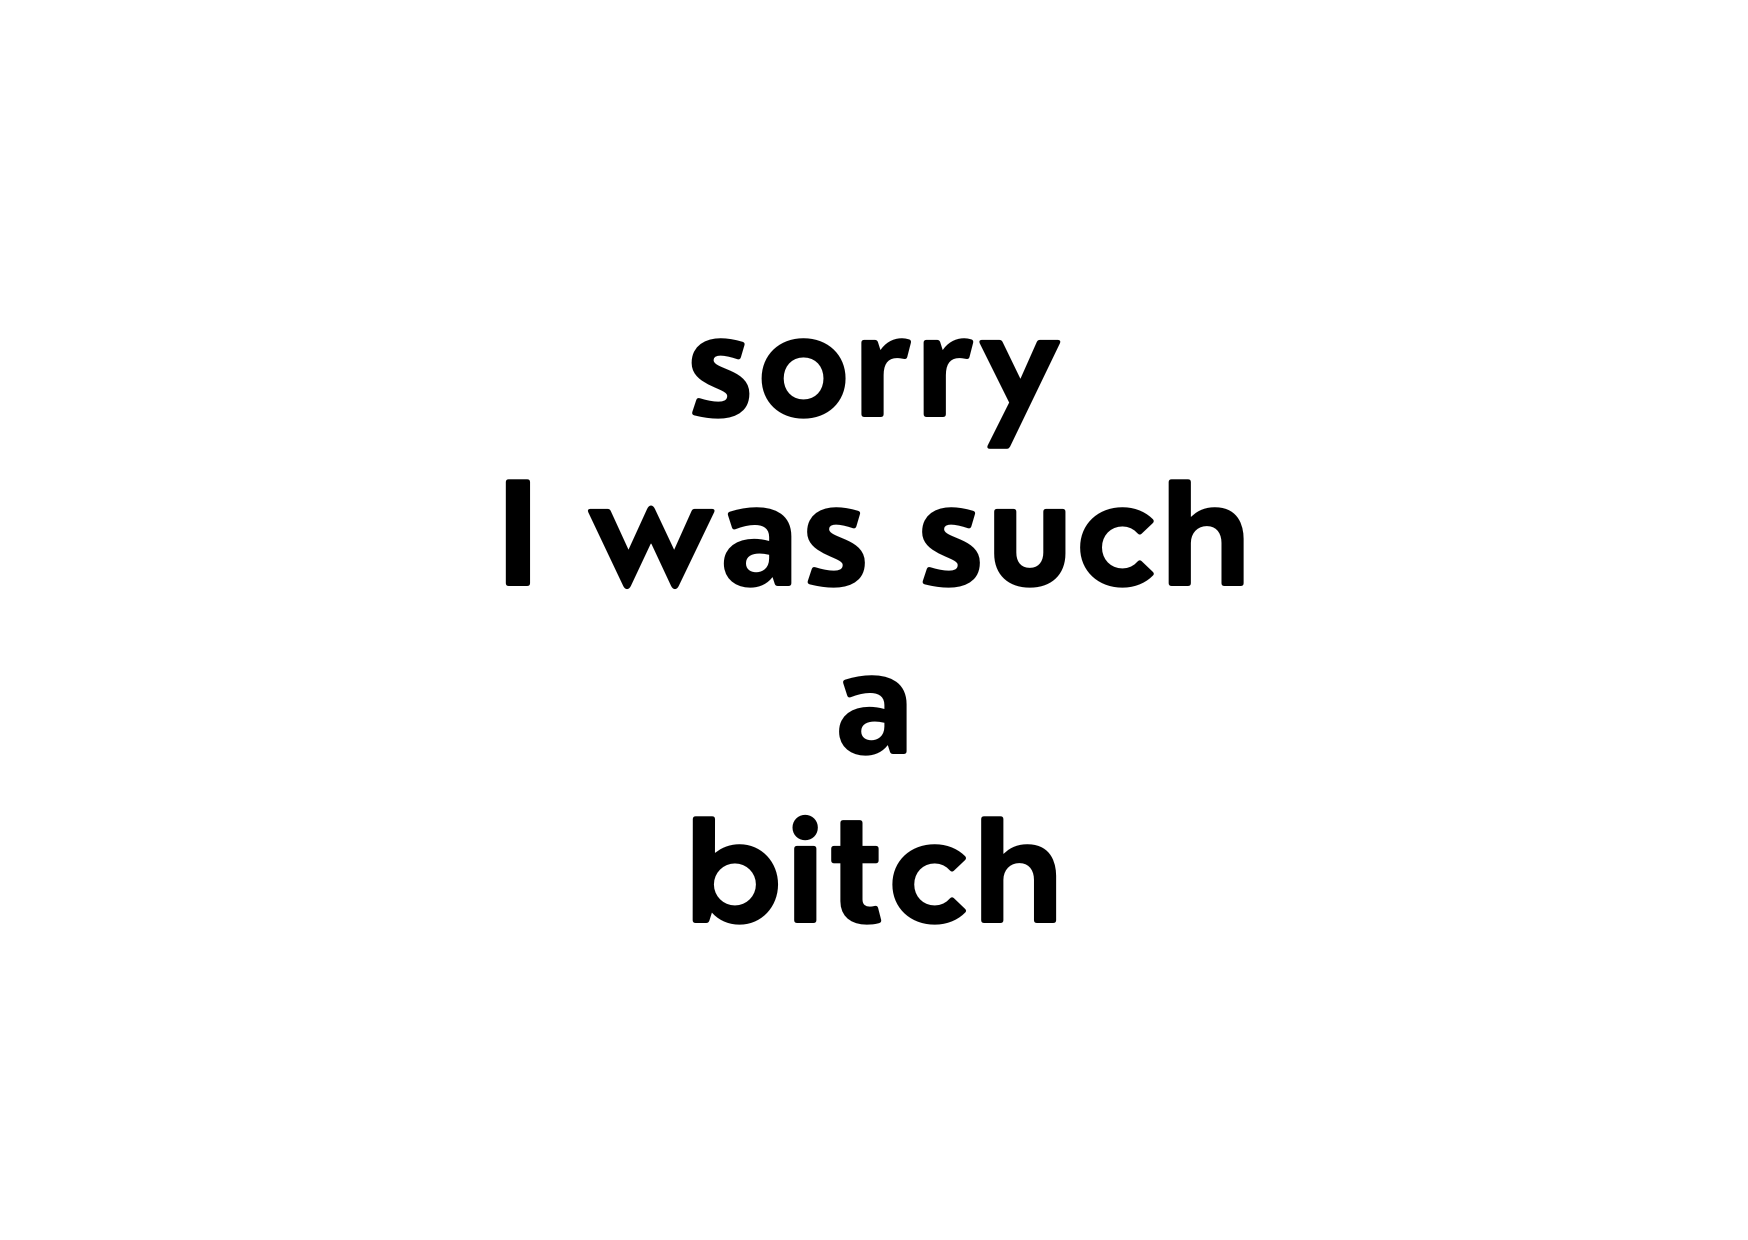 White seed paper greeting card saying "sorry I was such a bitch"